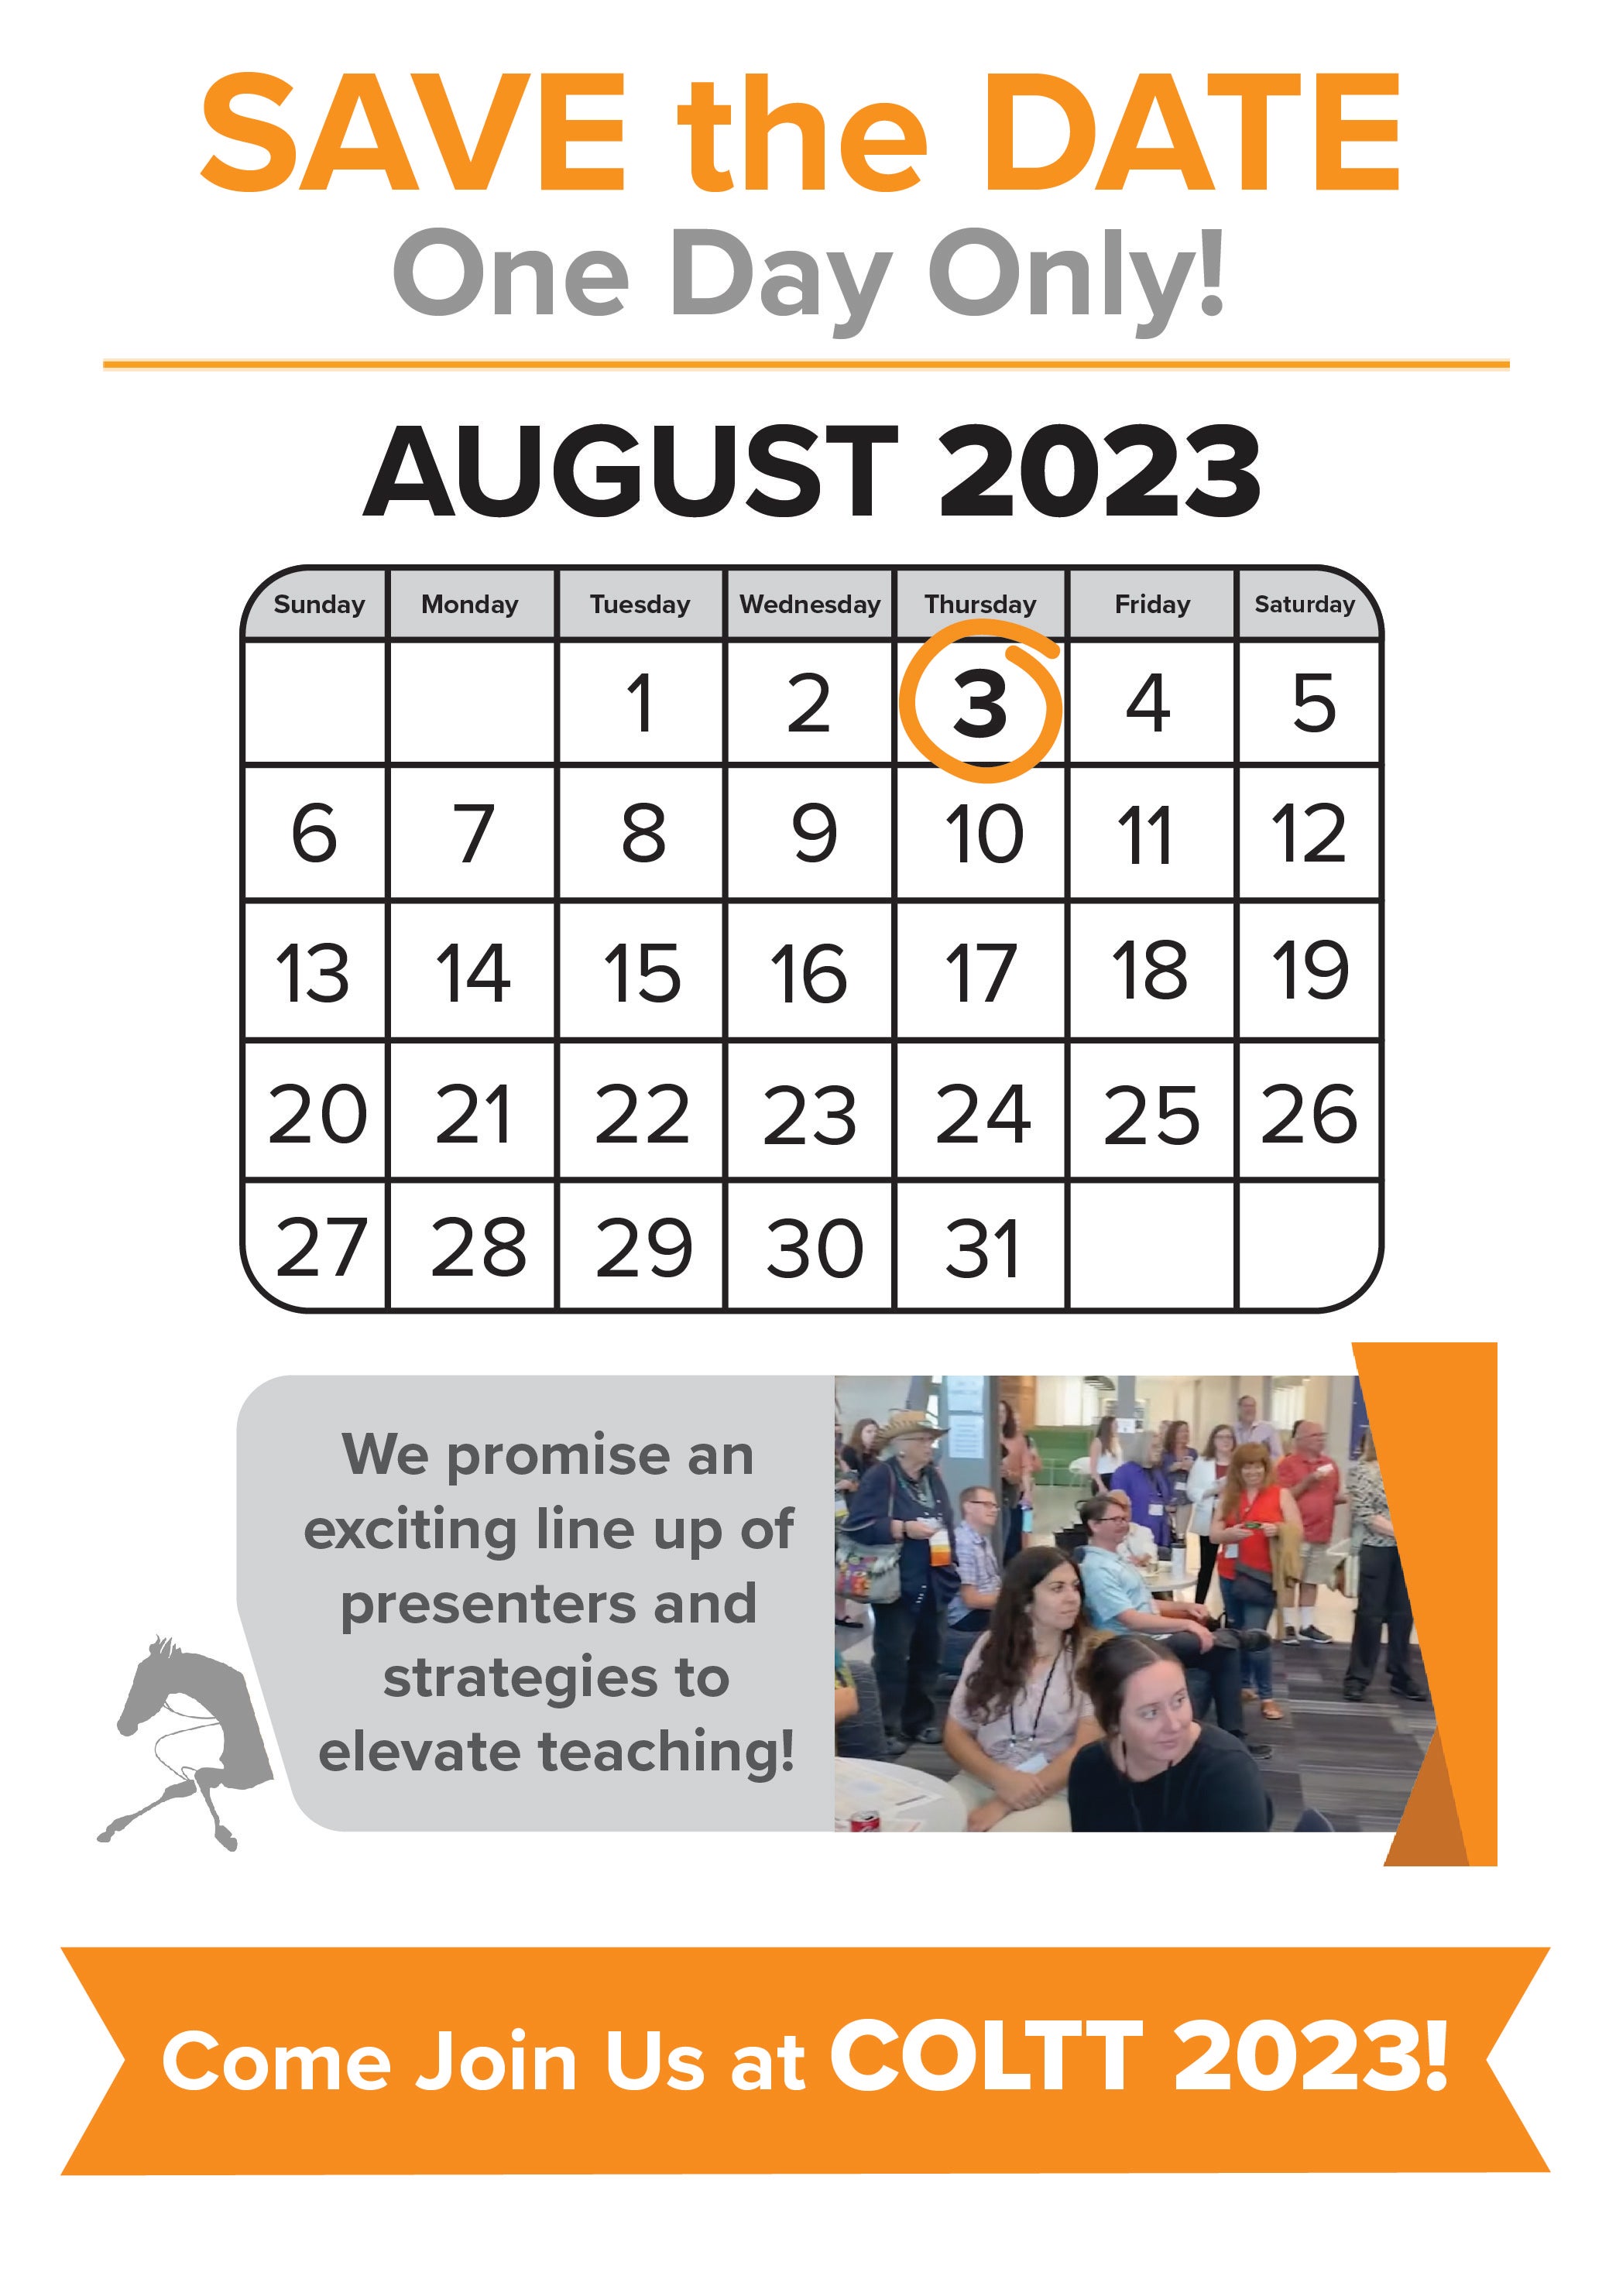 COLTT 2023 Save the Date, one-day only, August 3rd 2023! We promise an exciting line up of presenters and strategies to elevate teaching! Come join us at COLTT 2023.